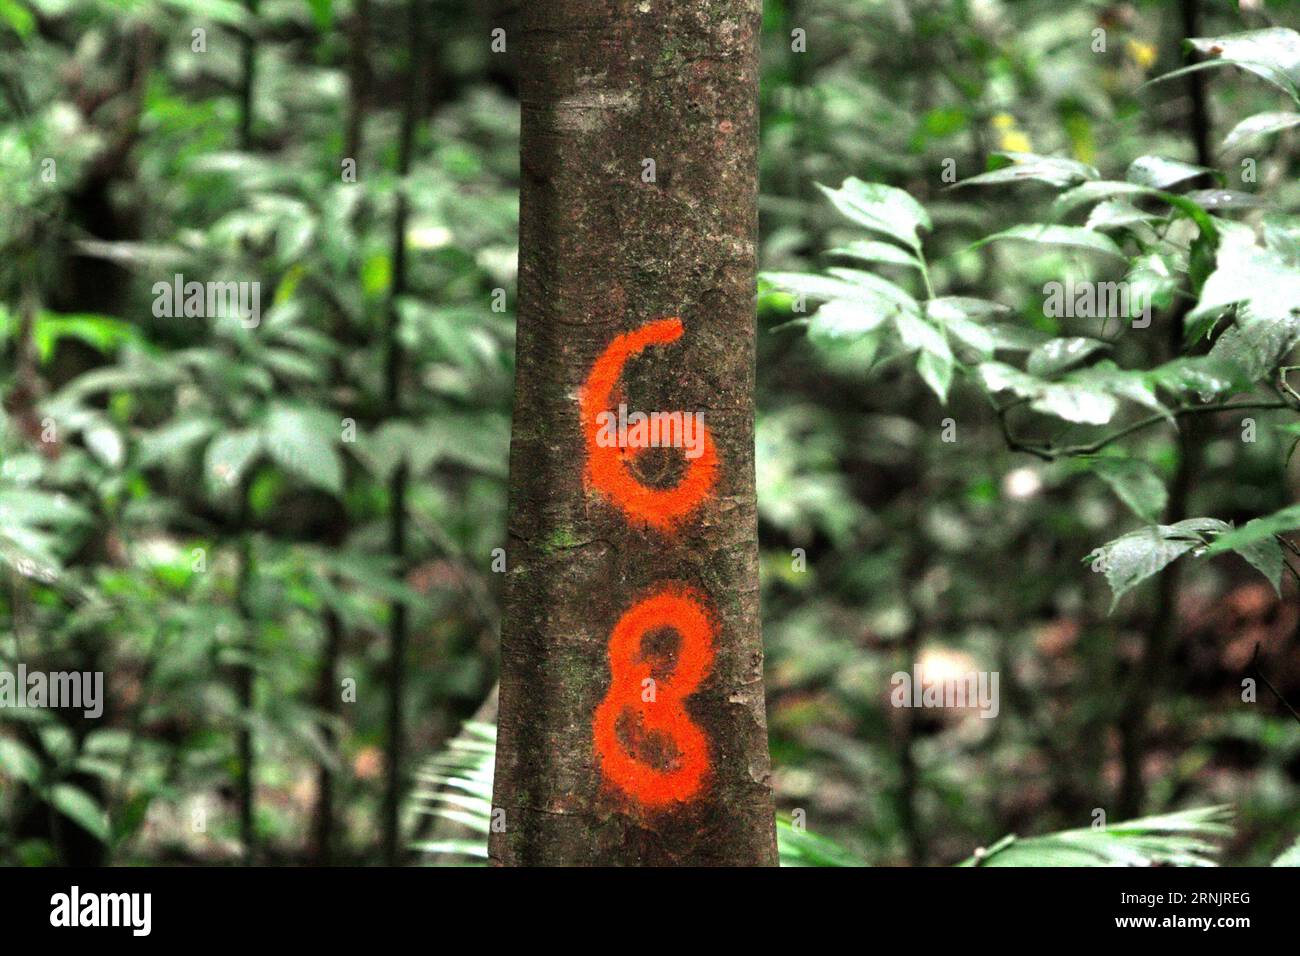 A marker is painted on a trunk in Tangkoko forest, a protected habitat for many species including Sulawesi black-crested macaques (Macaca nigra) located in North Sulawesi, Indonesia. Primatologists have revealed that climate change may reduce the habitat suitability of primate species. A recent report revealed that the temperature is indeed increasing in Tangkoko forest, and the overall fruit abundance decreased. Stock Photo